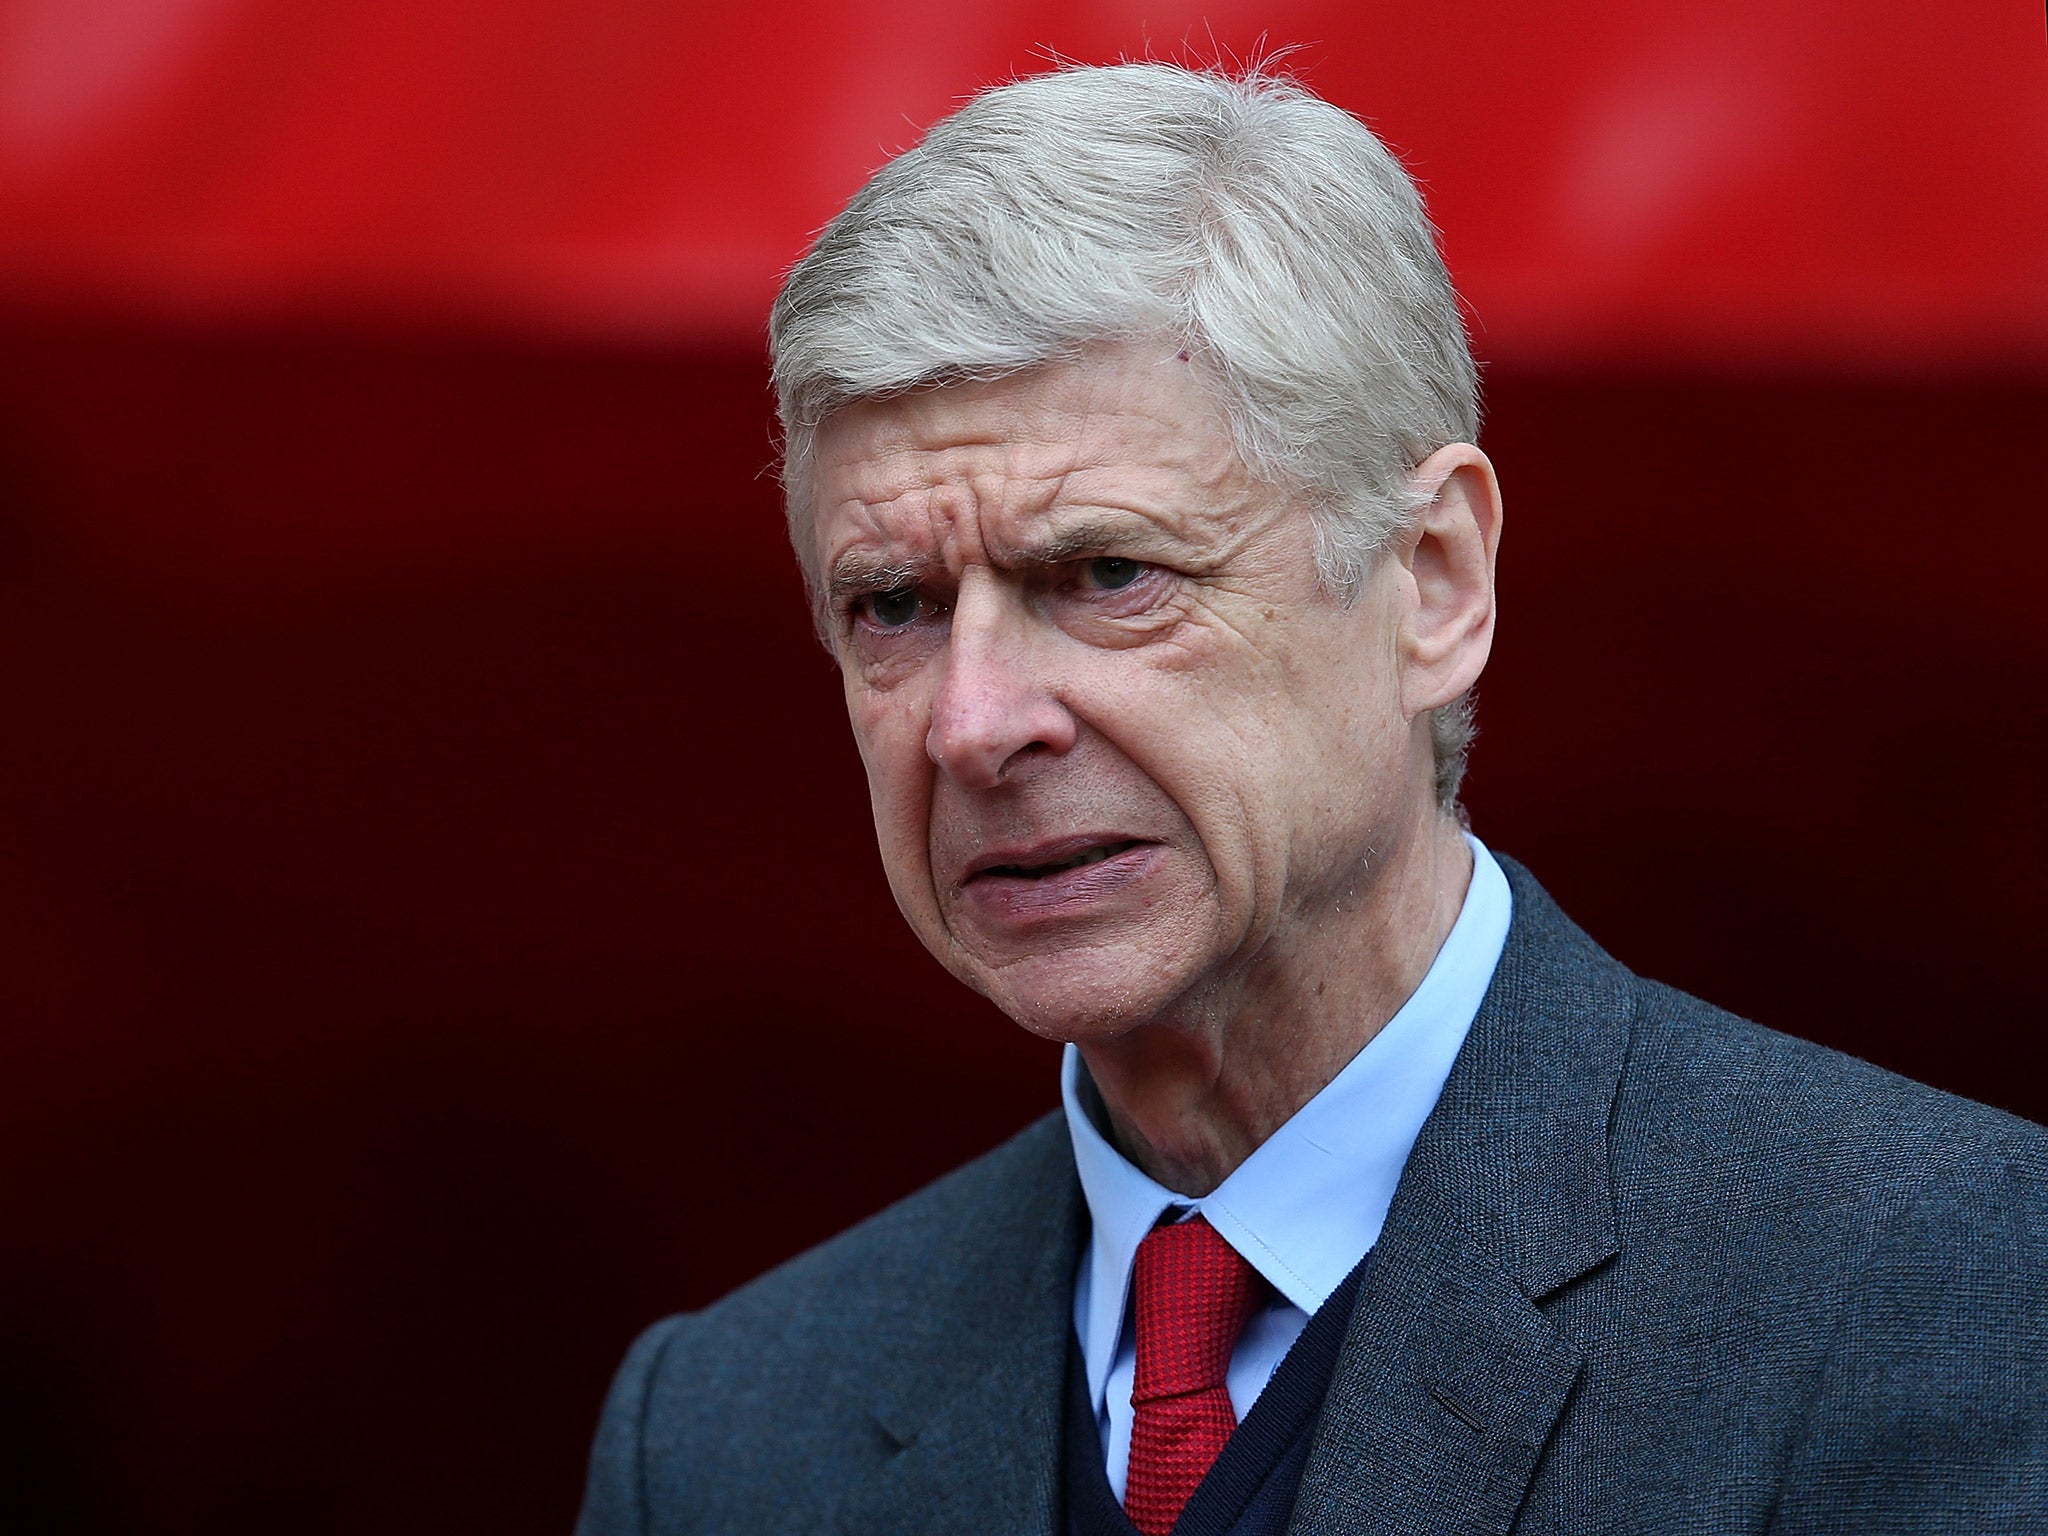 Arsene Wenger is facing a battle to ensure Arsenal finish in the top four